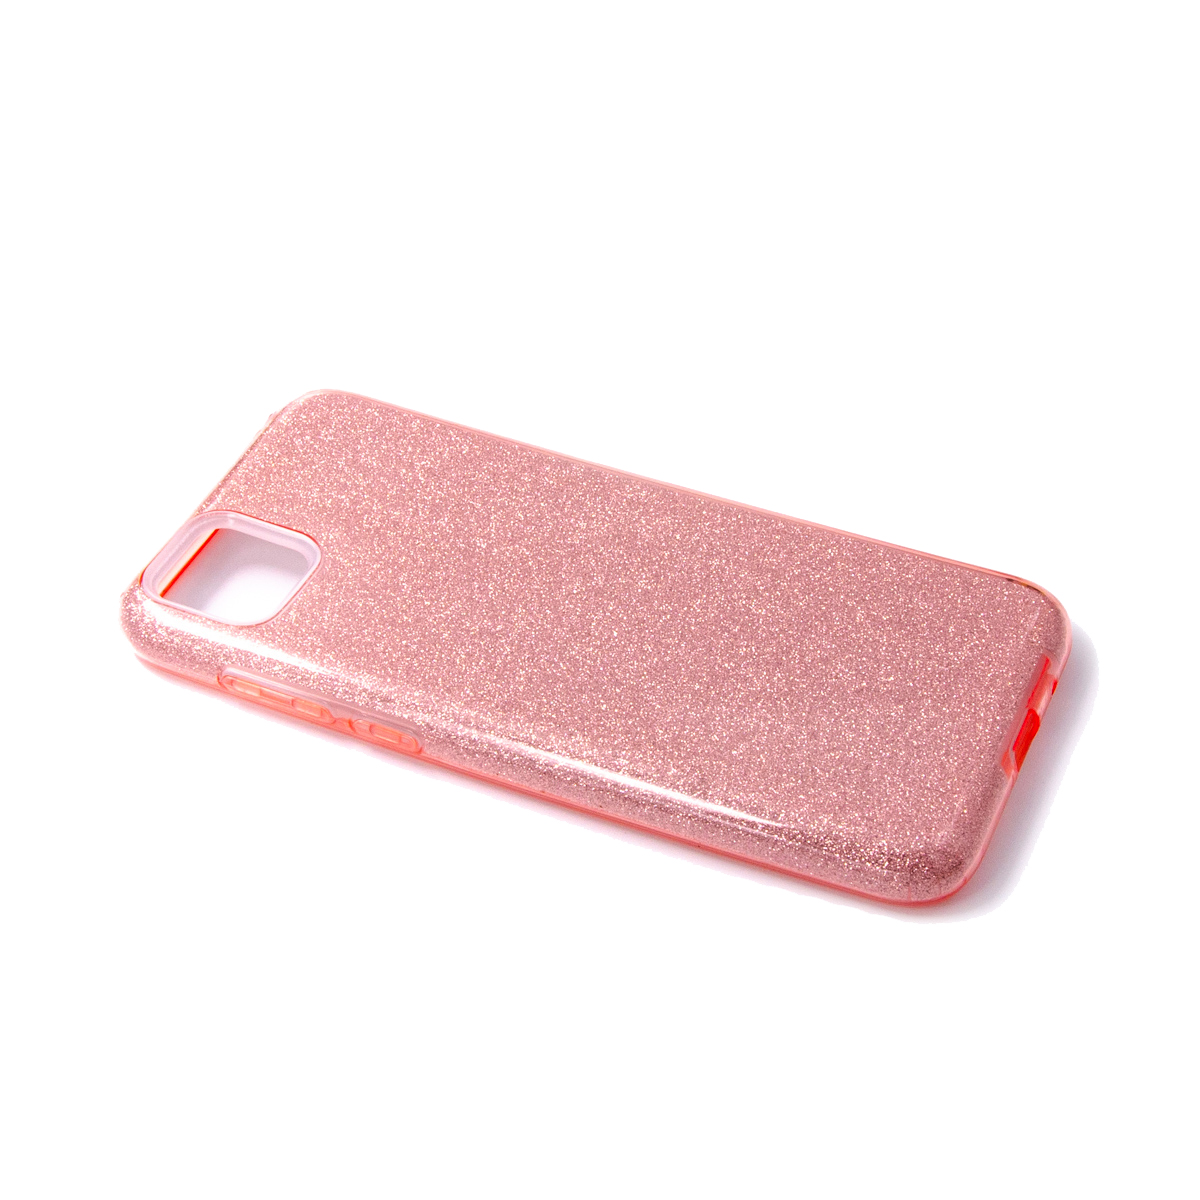 Tpu sparkly shine y5p/honor 9s (pink)